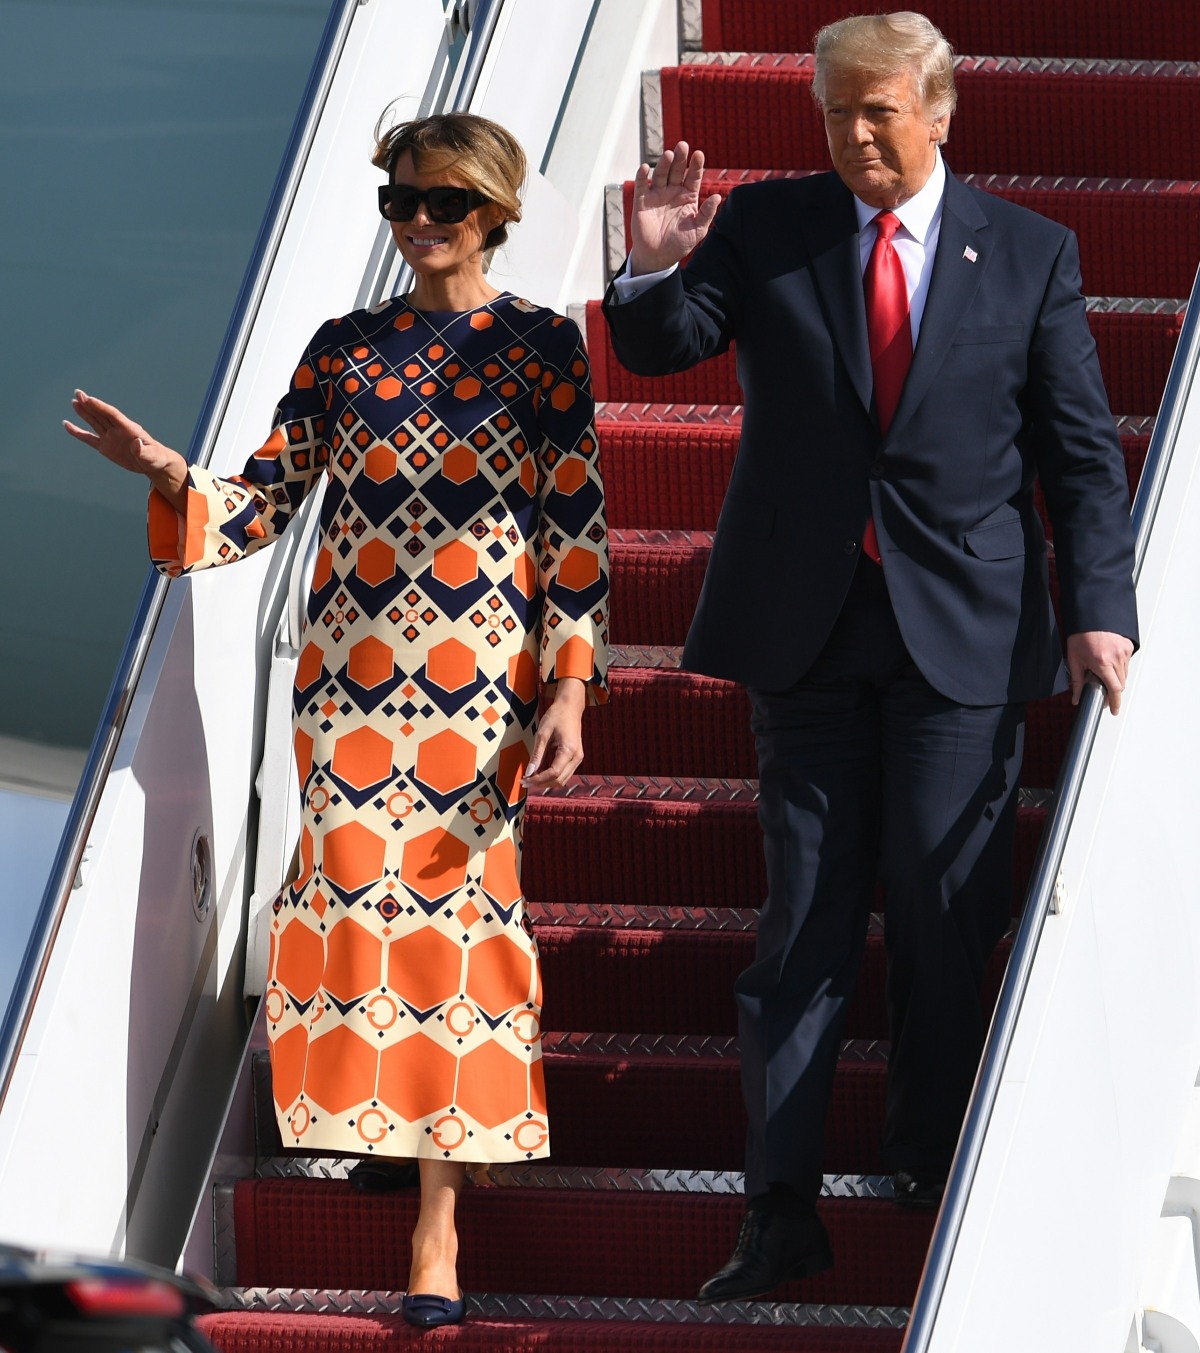 President Donald Trump and Melania Trump arrive on Airforce One at Palm Beach International Airport